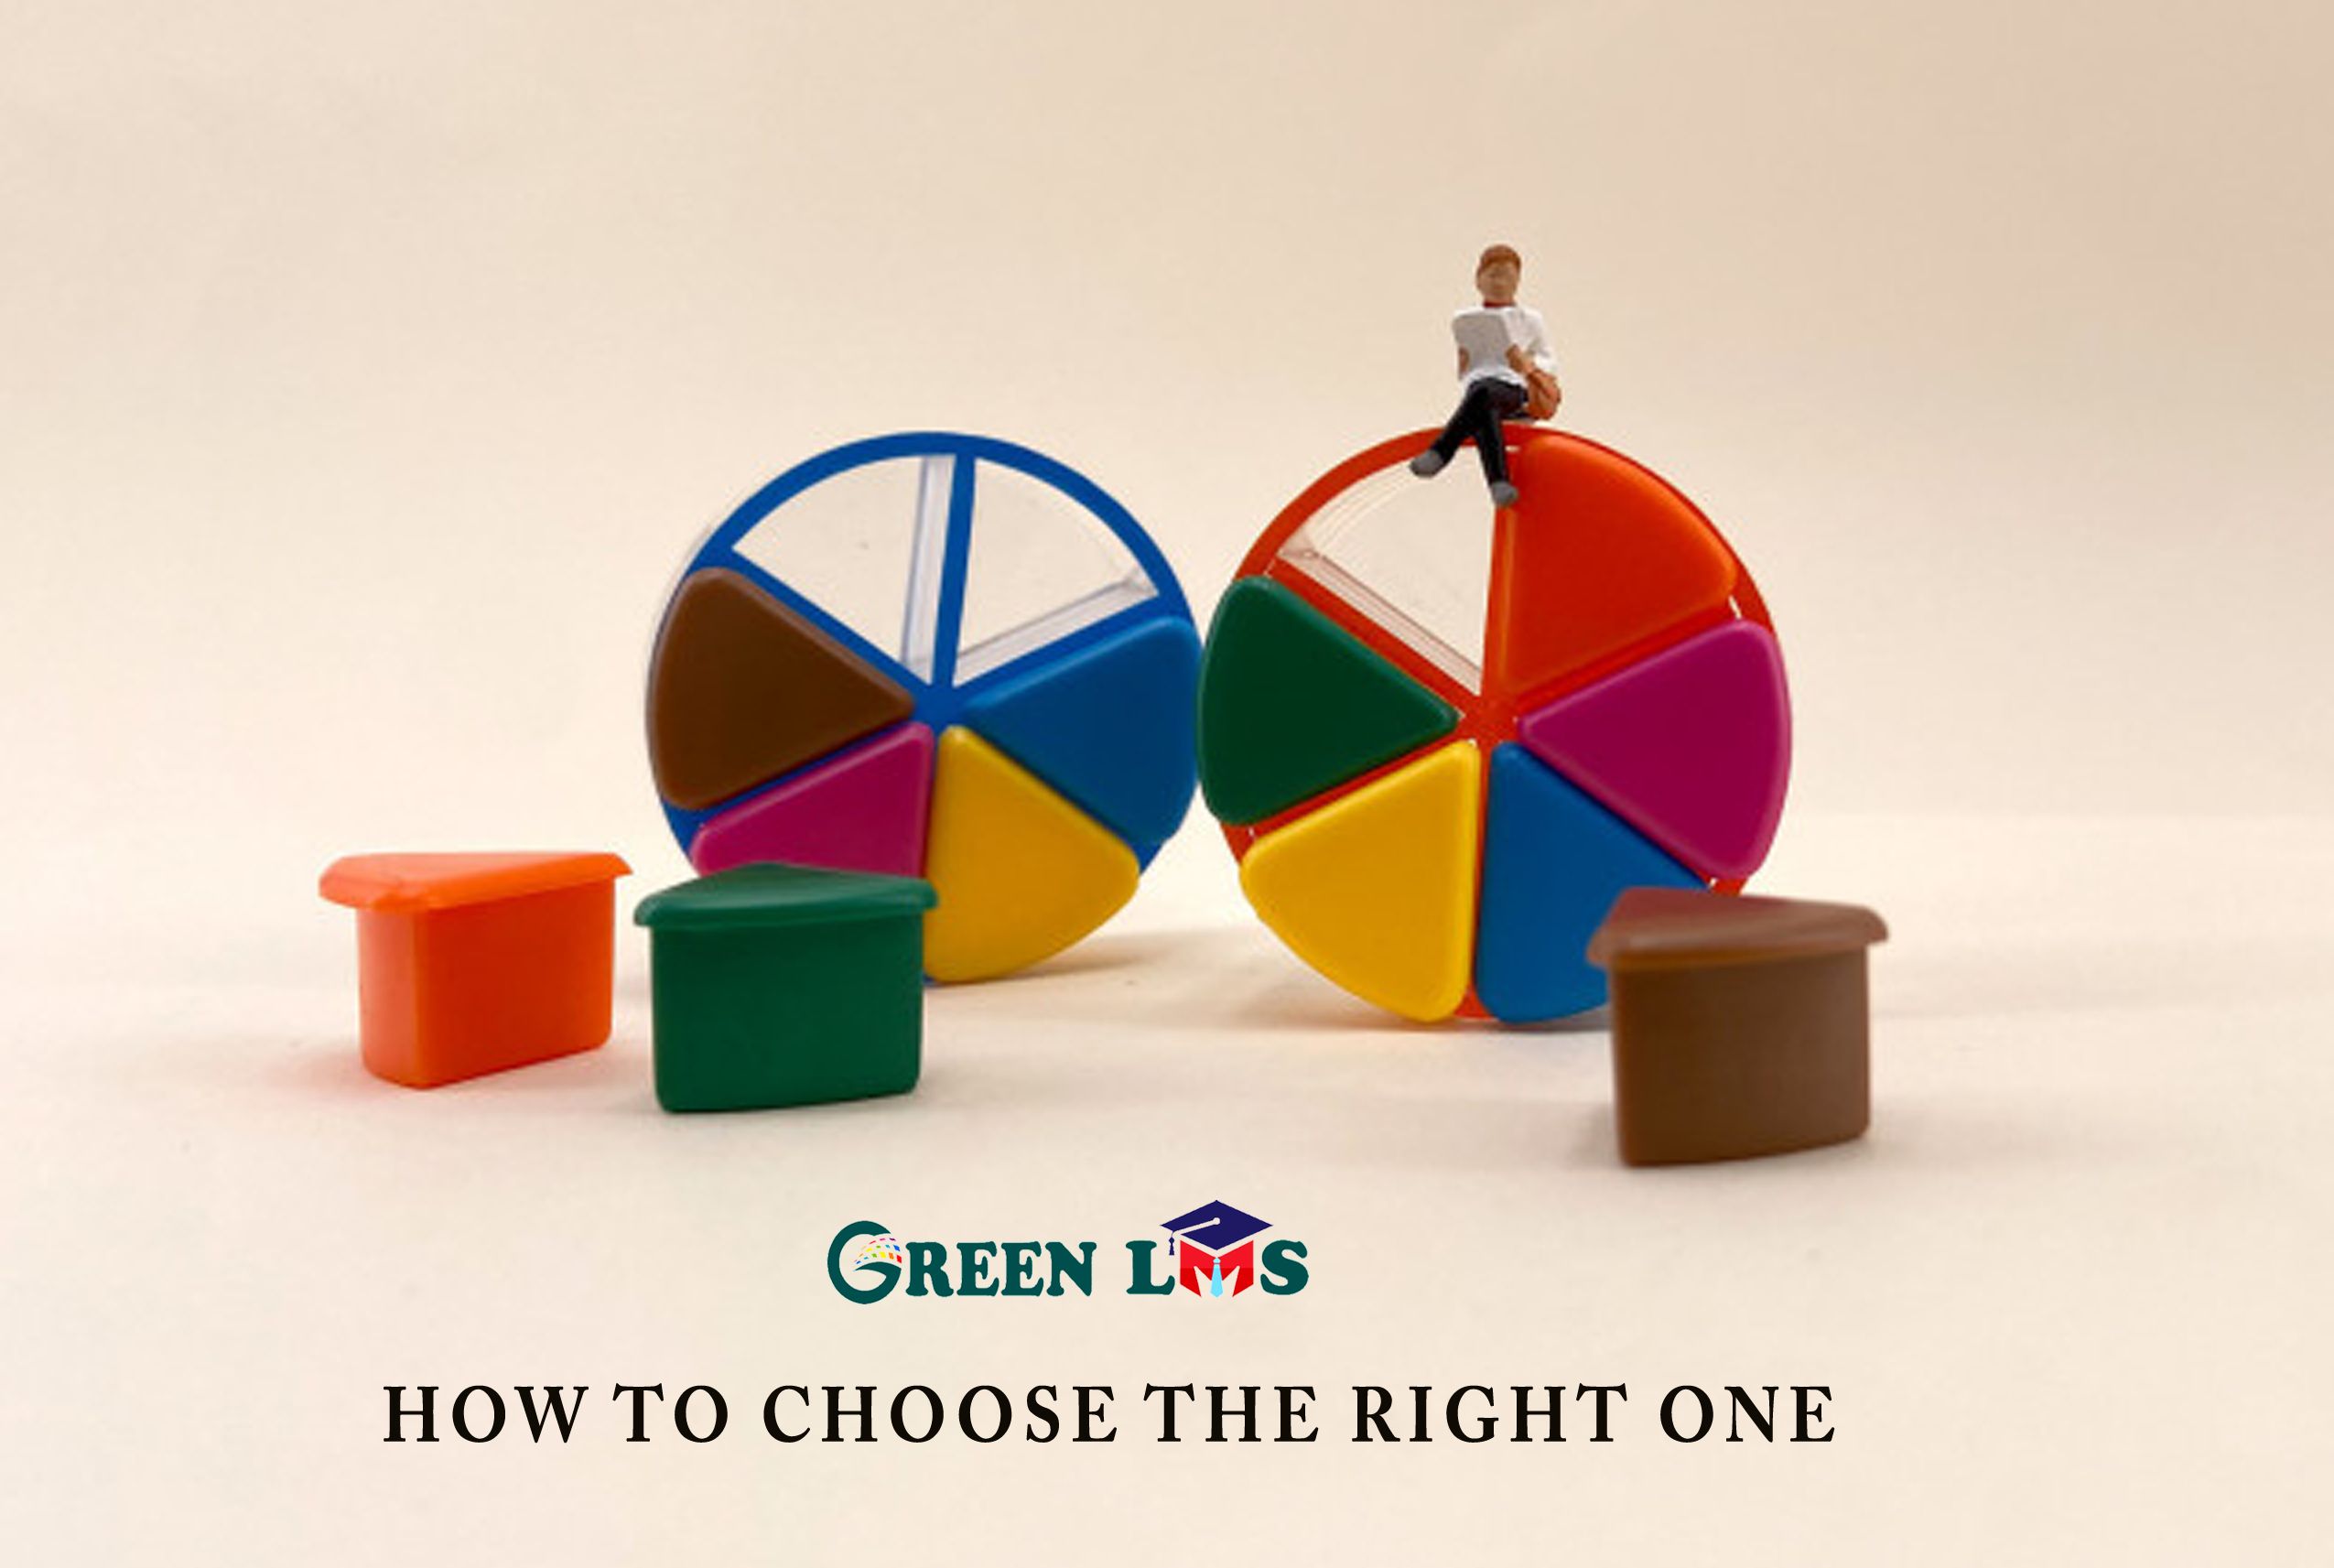 HOW TO CHOOSE THE RIGHT ONE